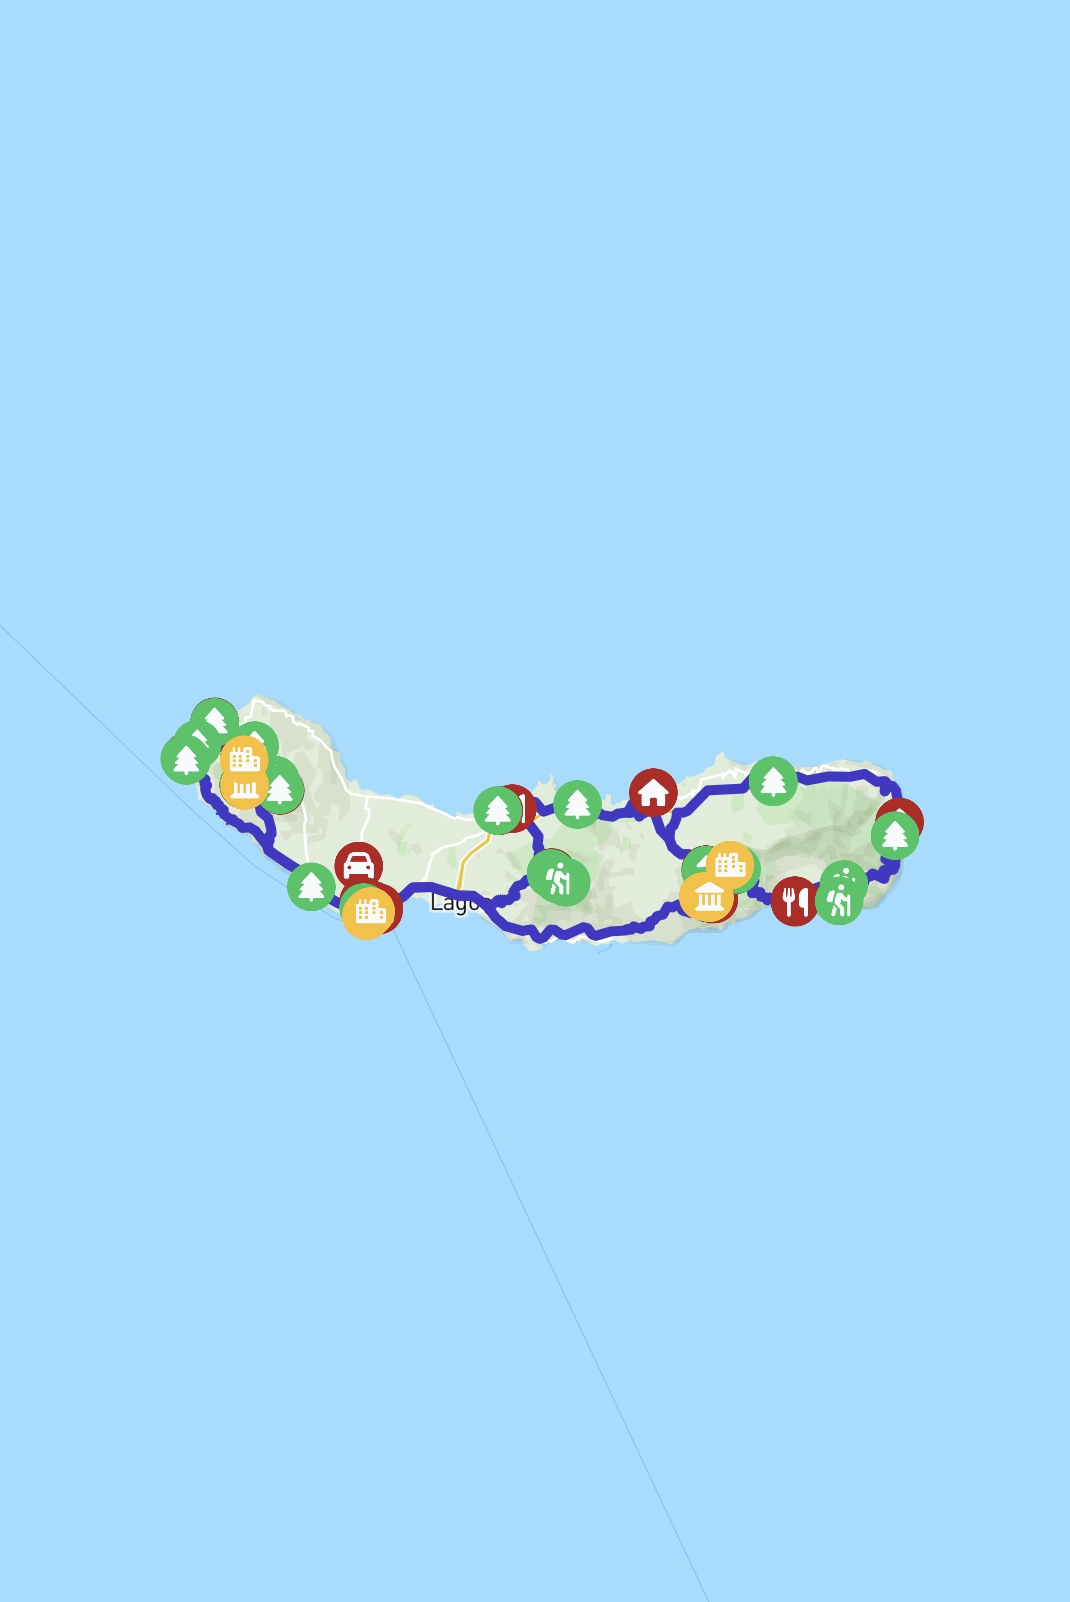 A map showing the route across Azores Islands in Portugal.